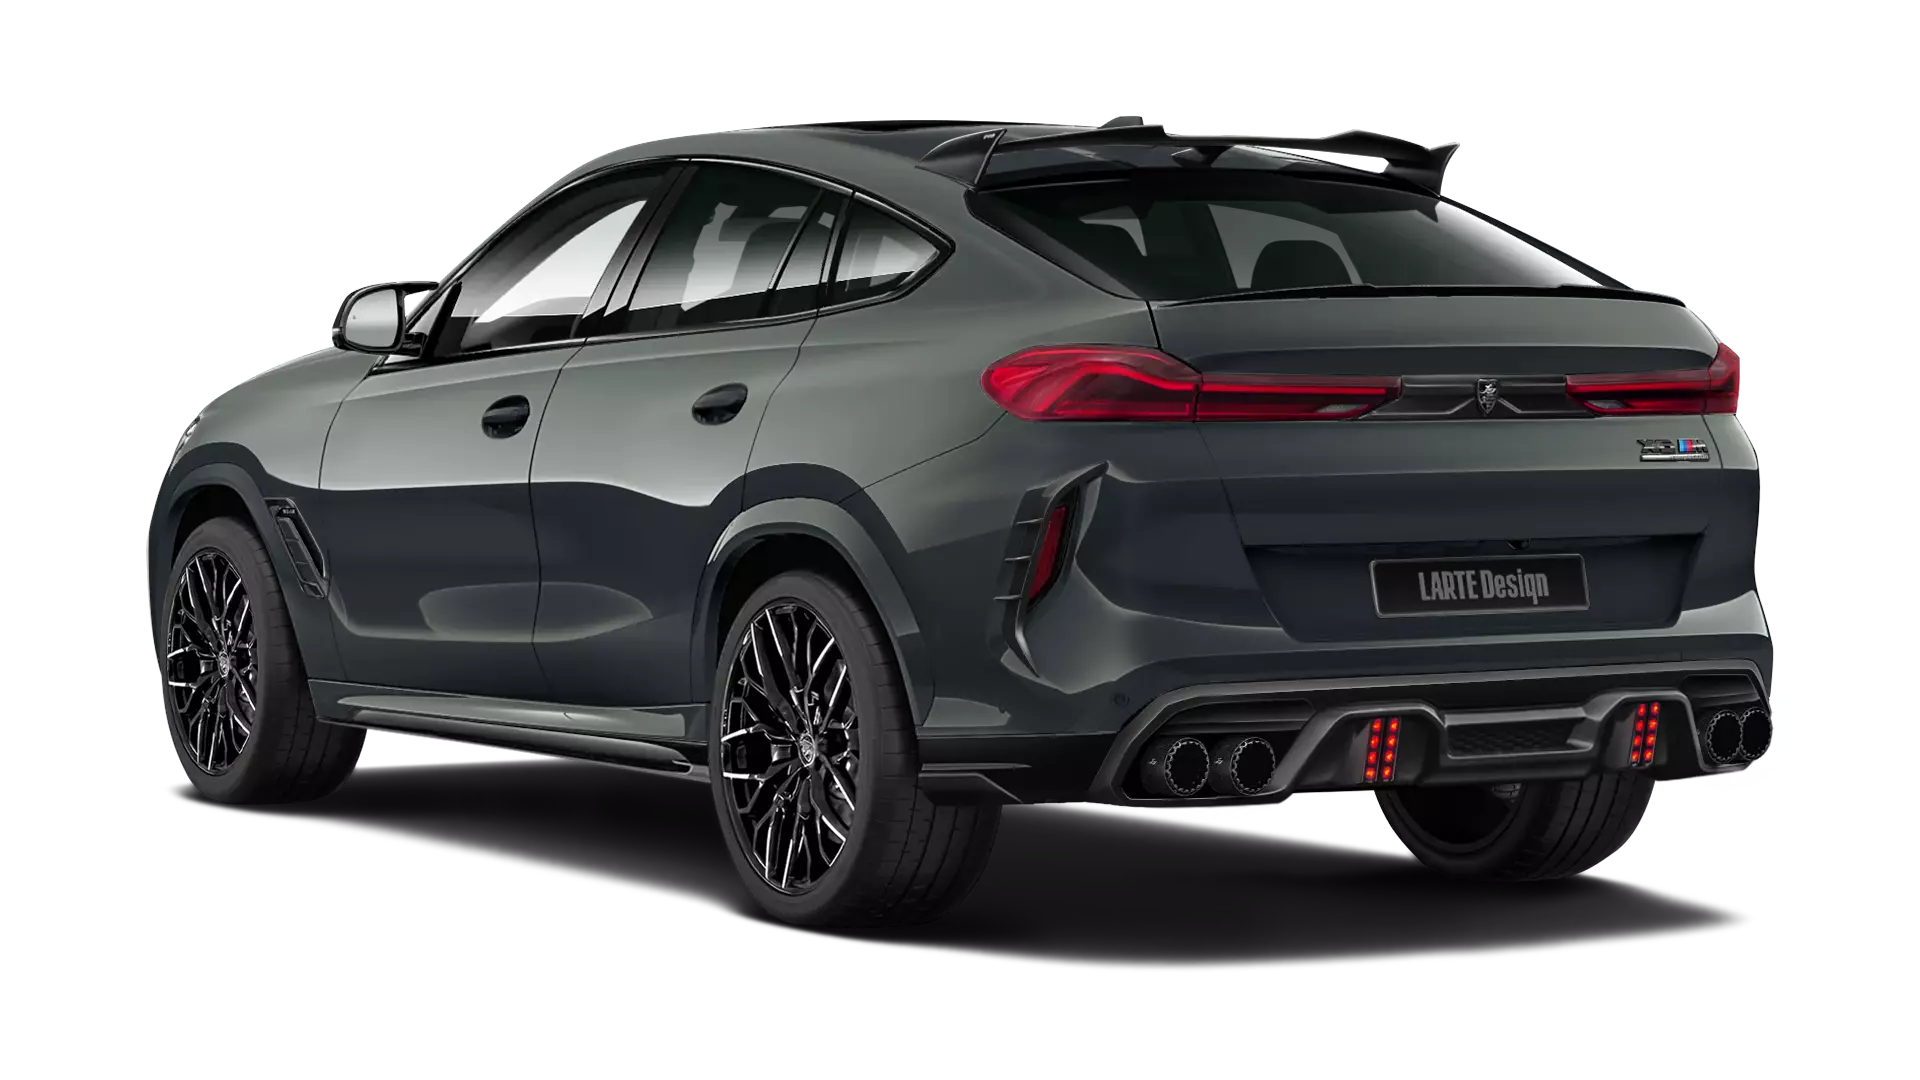 BMW X6M F96 with painted body kit: rear view shown in dravit grey